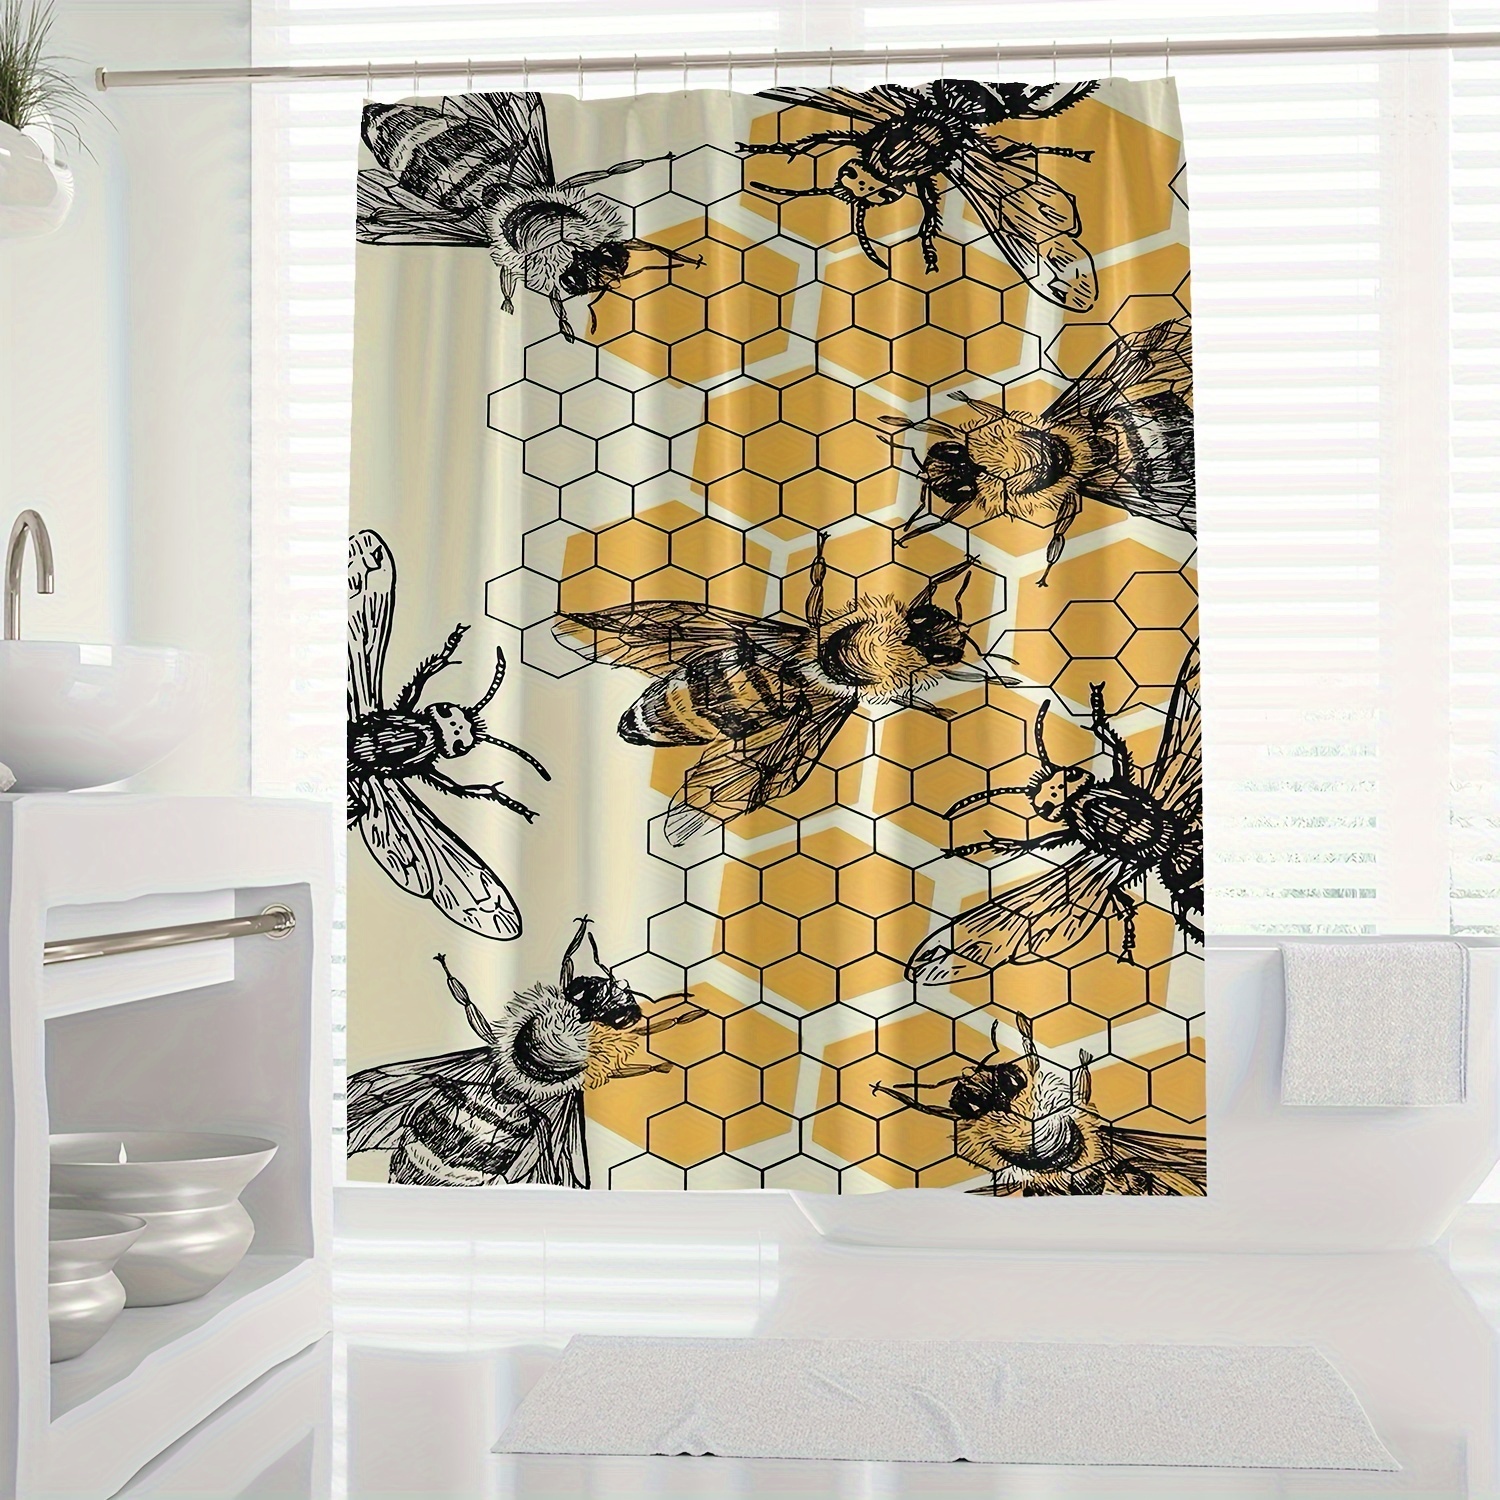 

Modern Honey Bee Hive Digital Print Shower Curtain With Hook - Water-resistant, Machine Washable, Knit Weave Polyester, Features Animal And Artistic Design, Suitable For All Seasons